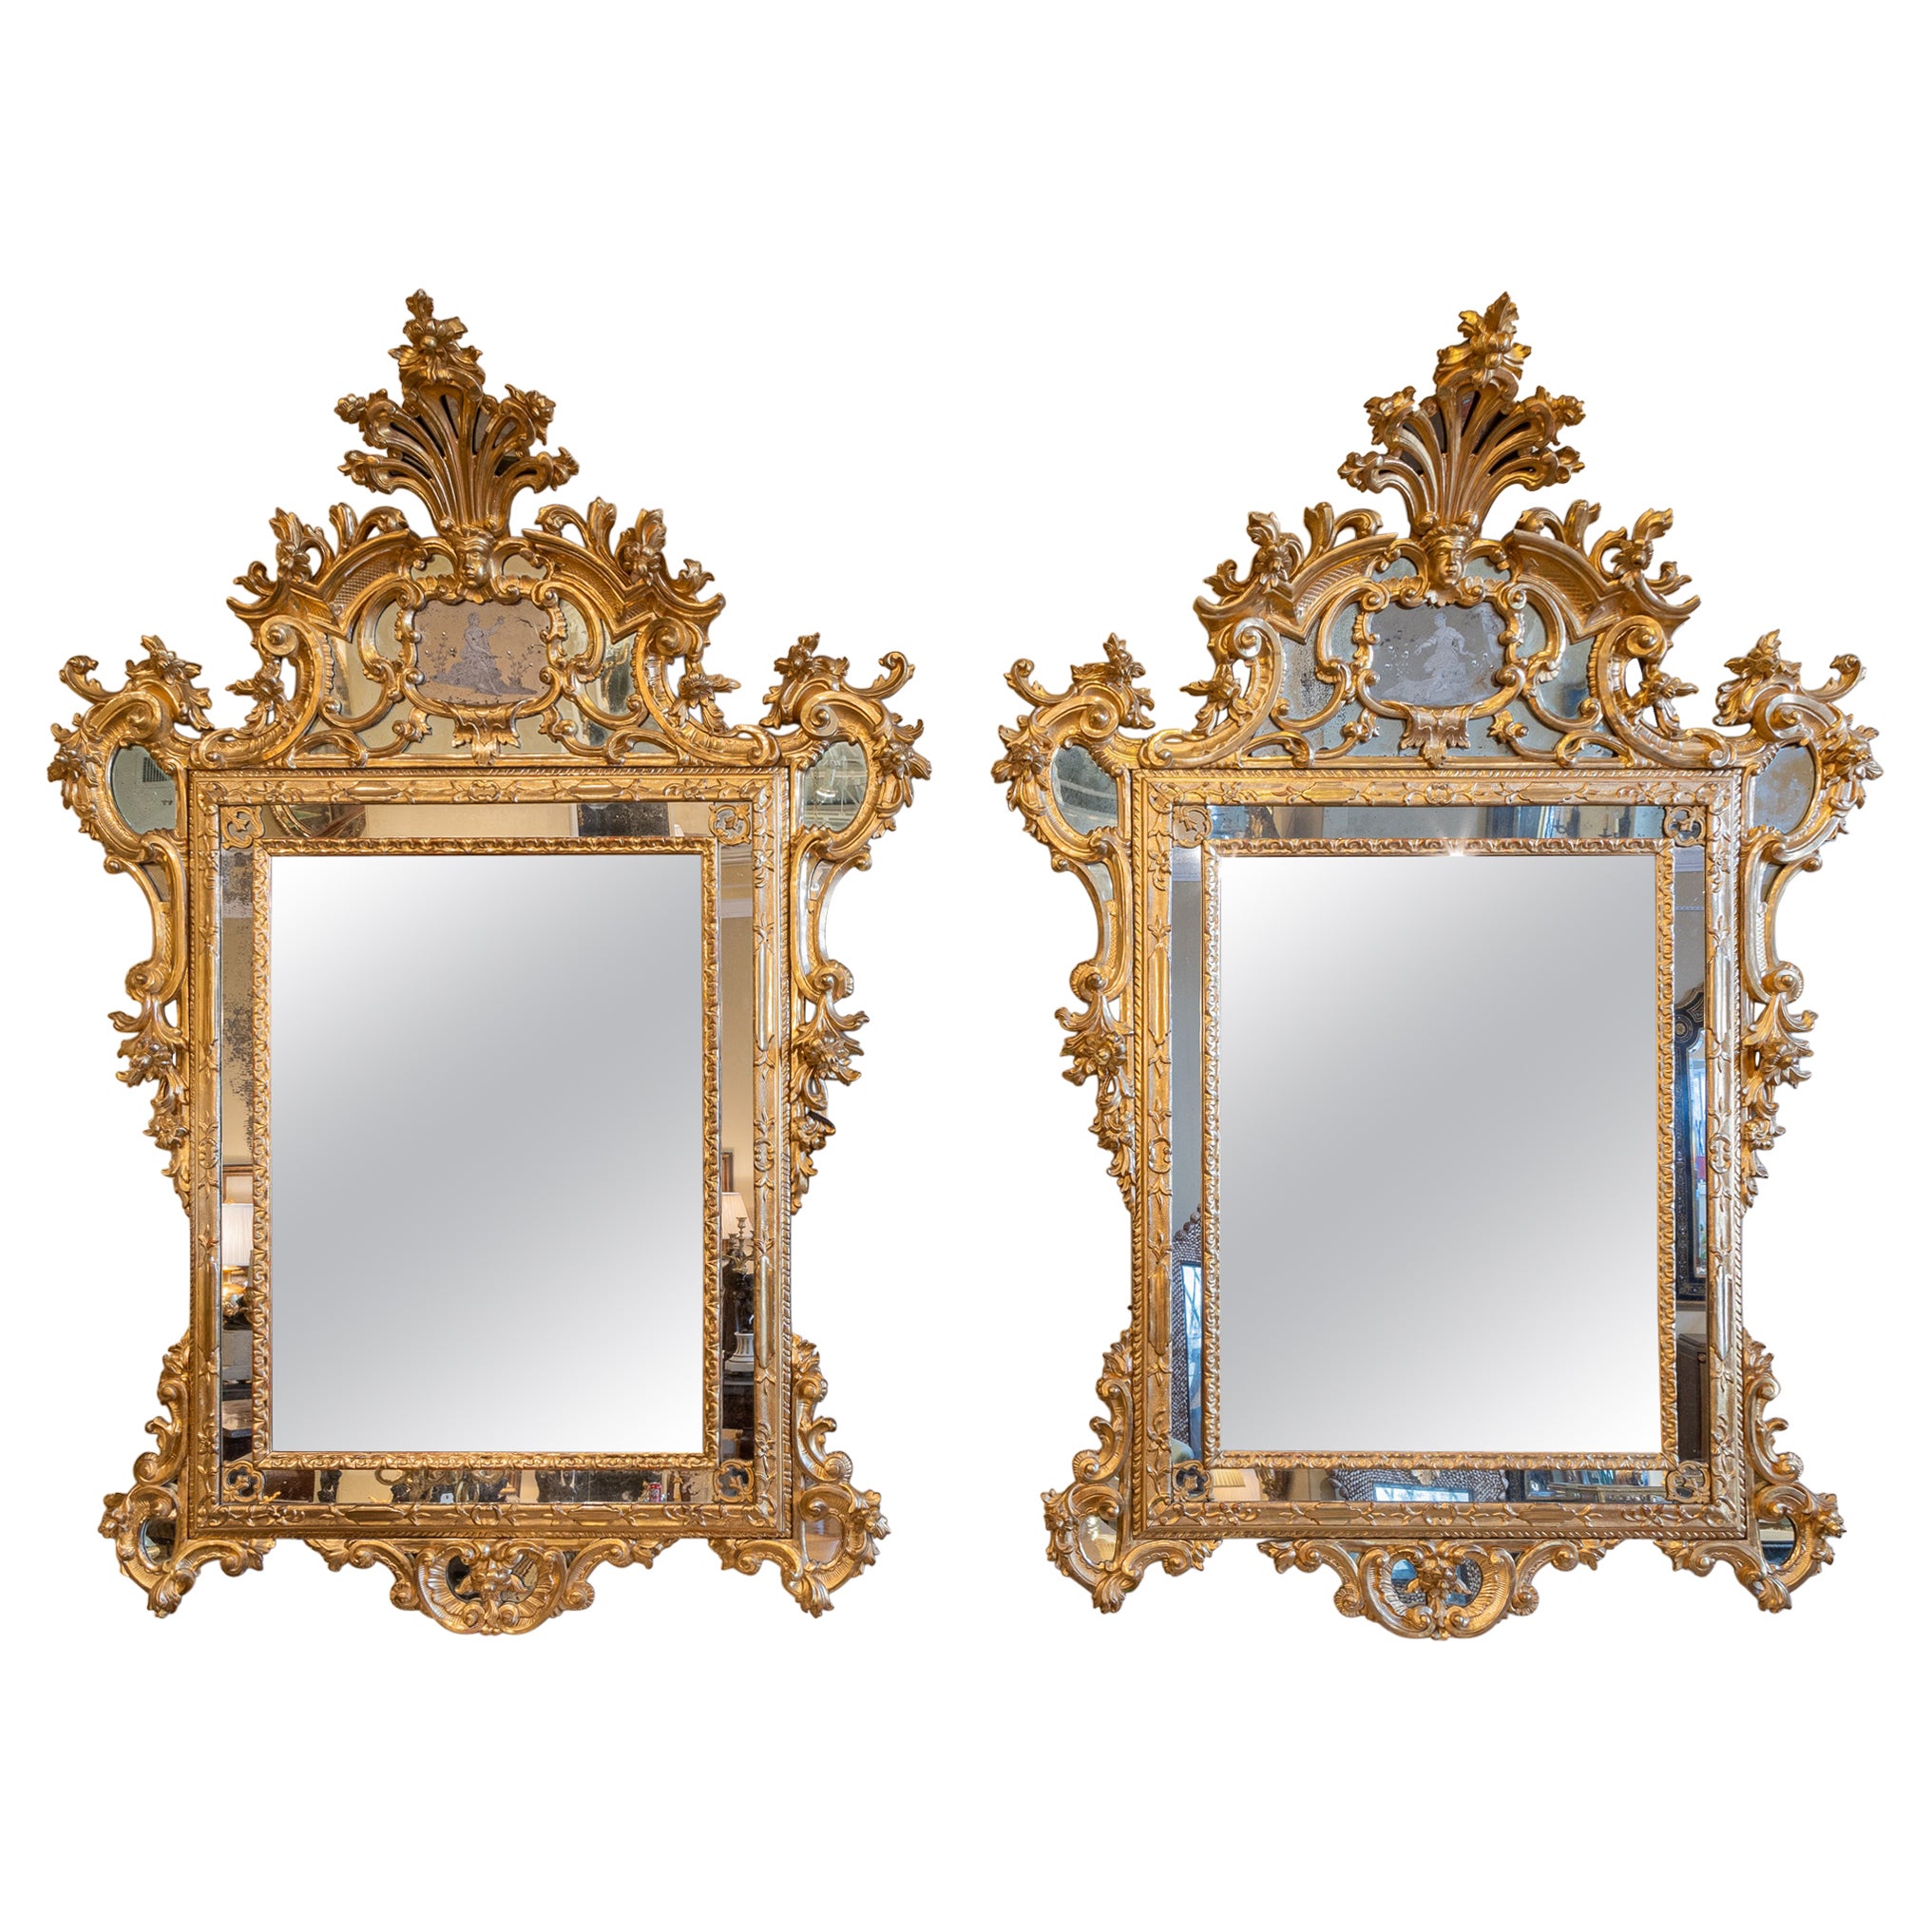 Very Fine Pair of 19th C French Water Gilt Carved and Etched Palatial Mirrors For Sale